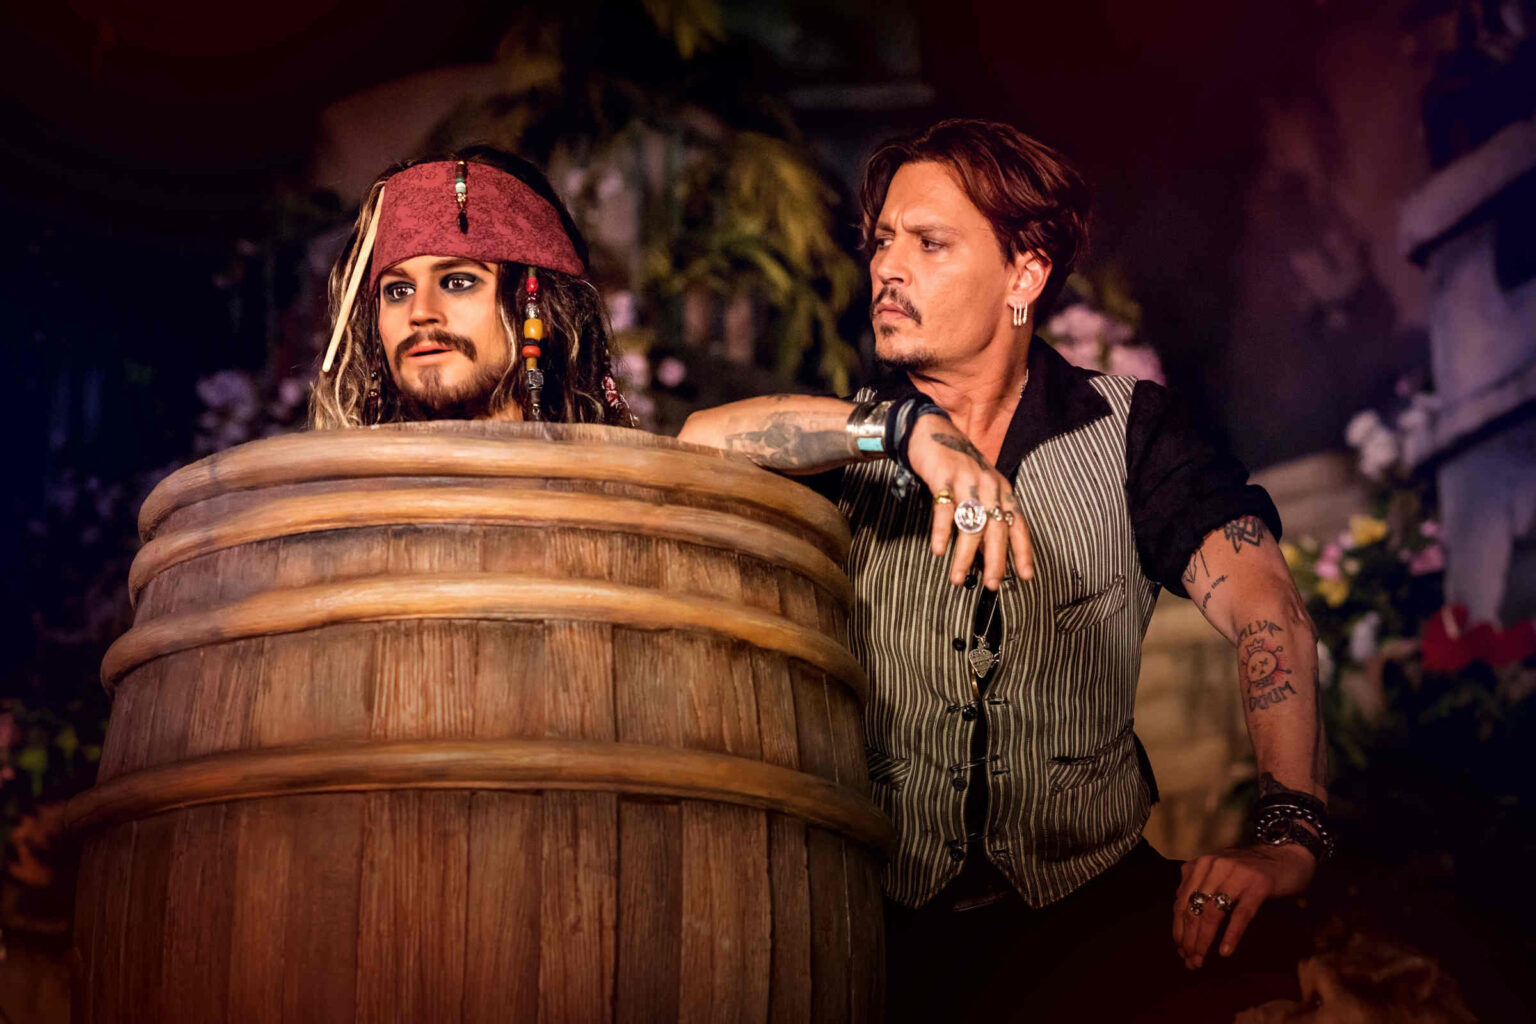 When the 'Pirates of the Caribbean' franchise dropped Johnny Depp, it seemed hopeless for the actor. Can the infamous Captain Jack Sparrow make a comeback?